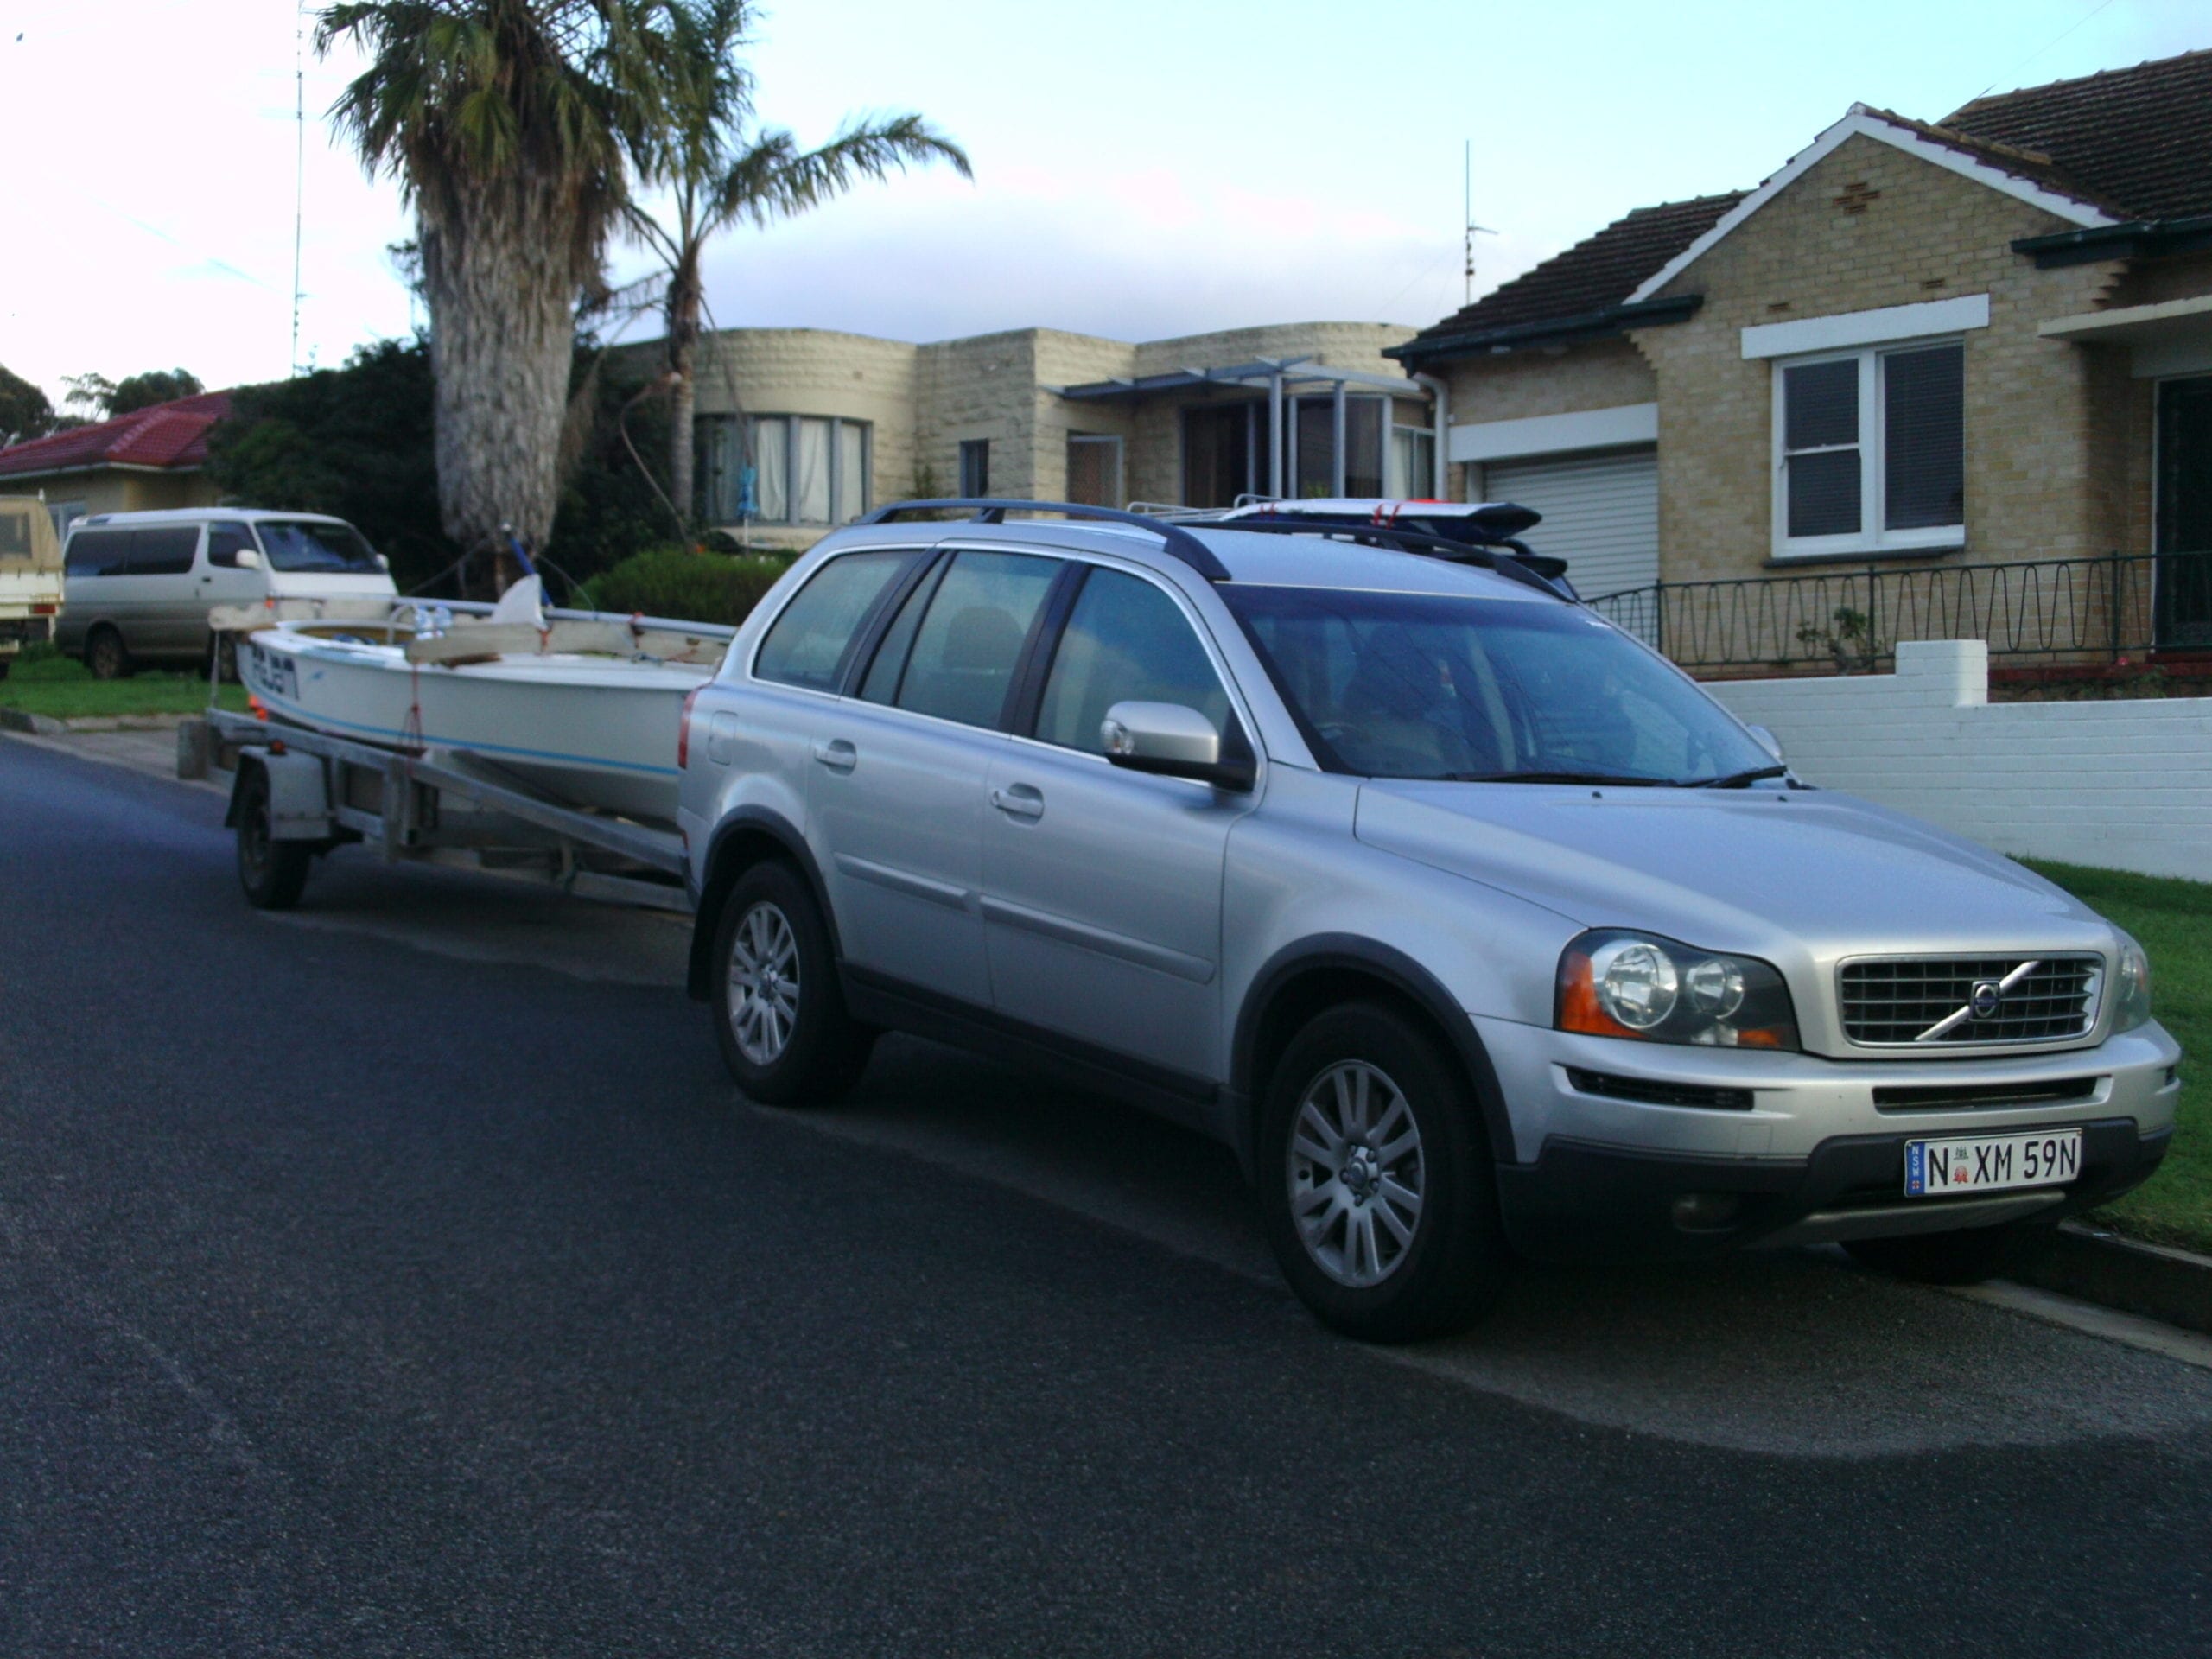 Project Regatta Vehicle was a success with Team Vic securing a new (to them) Volvo to tow V777 FIGJAM to Port Lincoln.